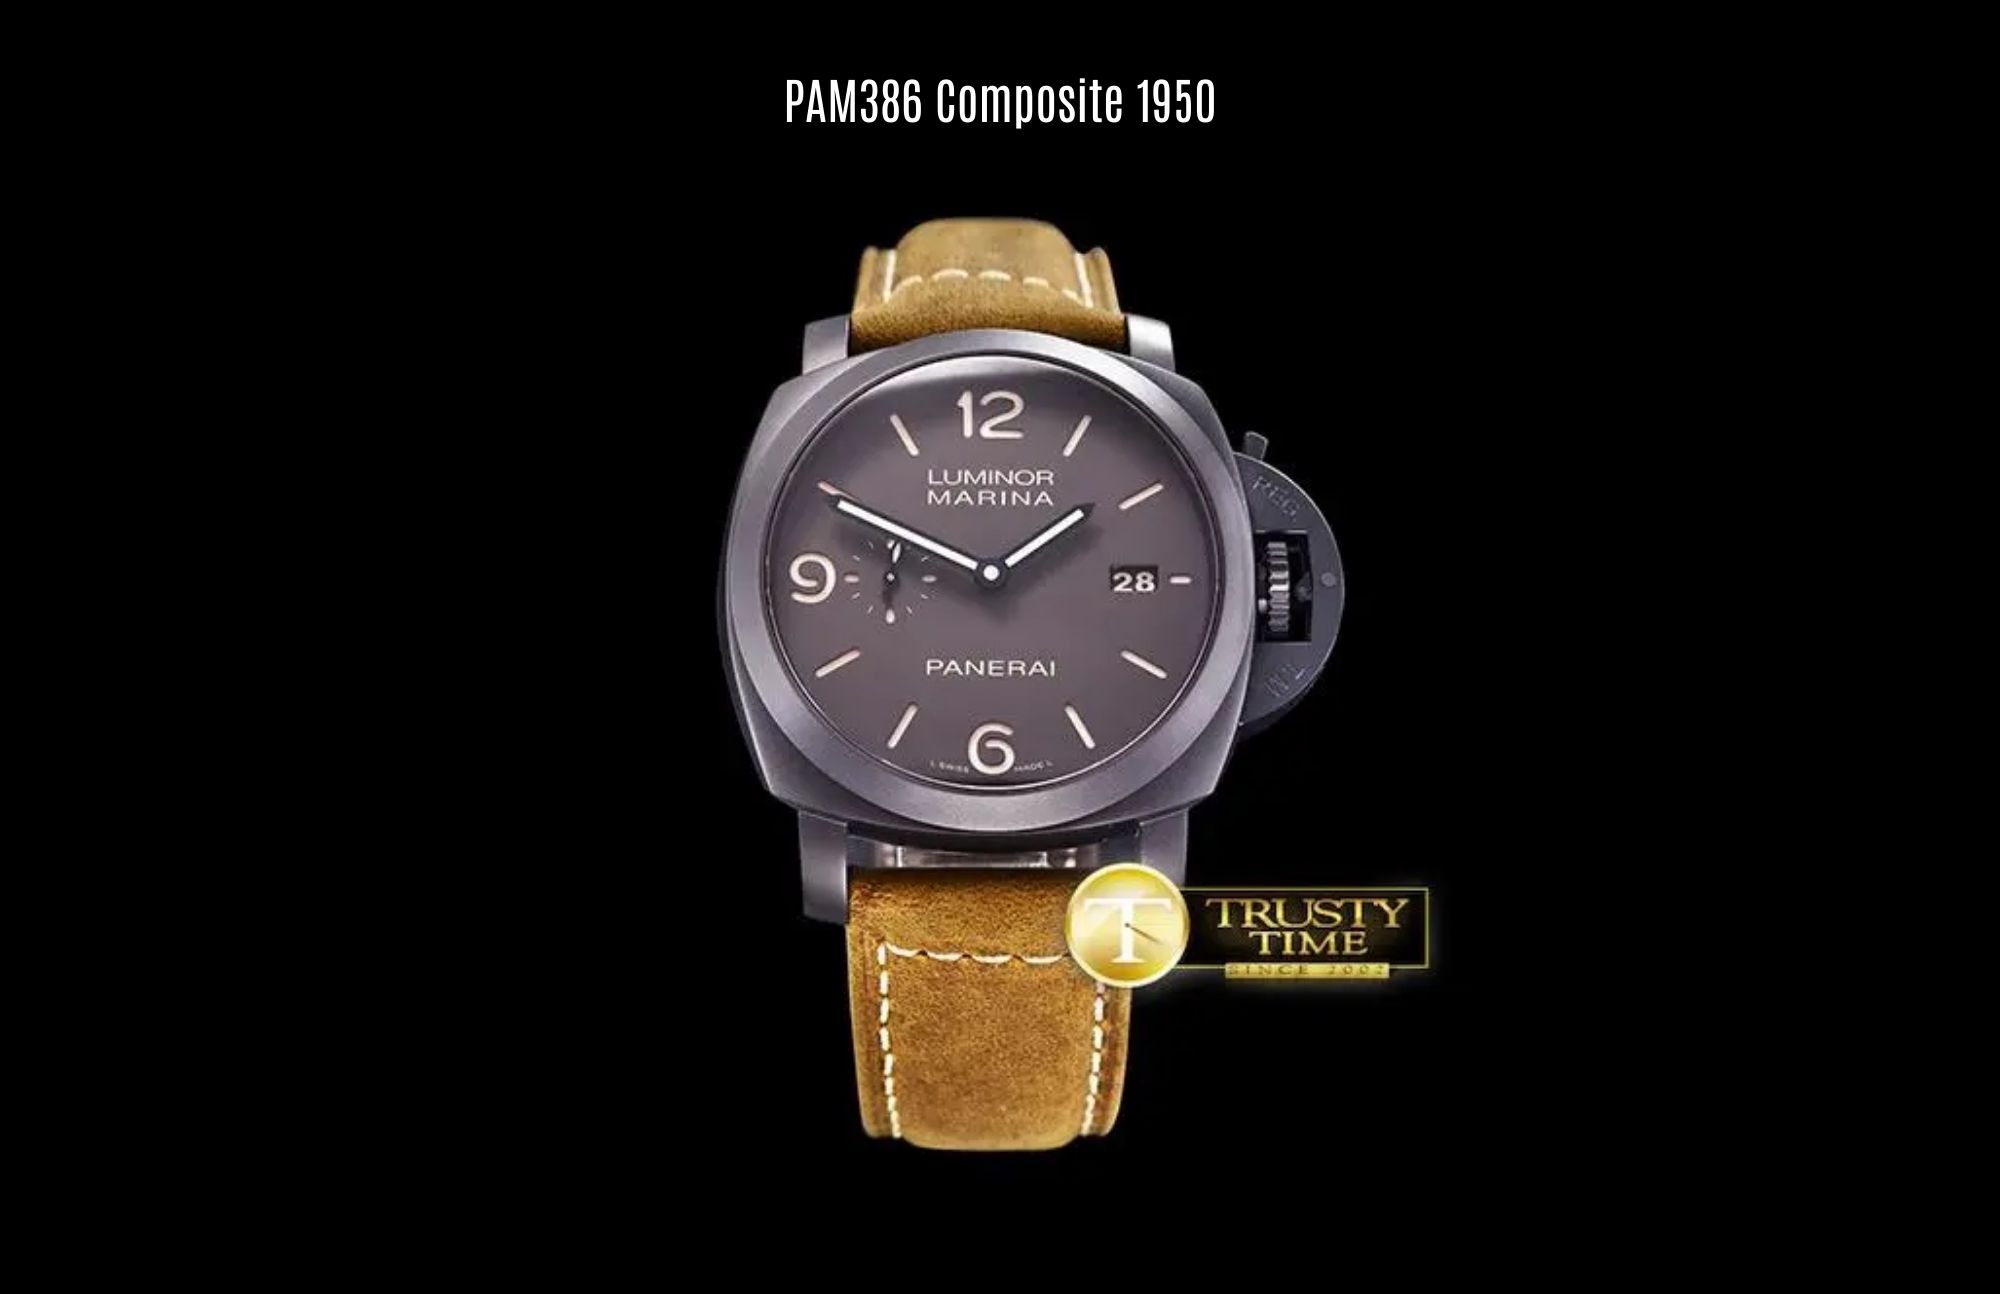 The PAM386 Composite 1950 is distinguished by its brown assolutemente leather and dome Sapphire Crystal in the front glass